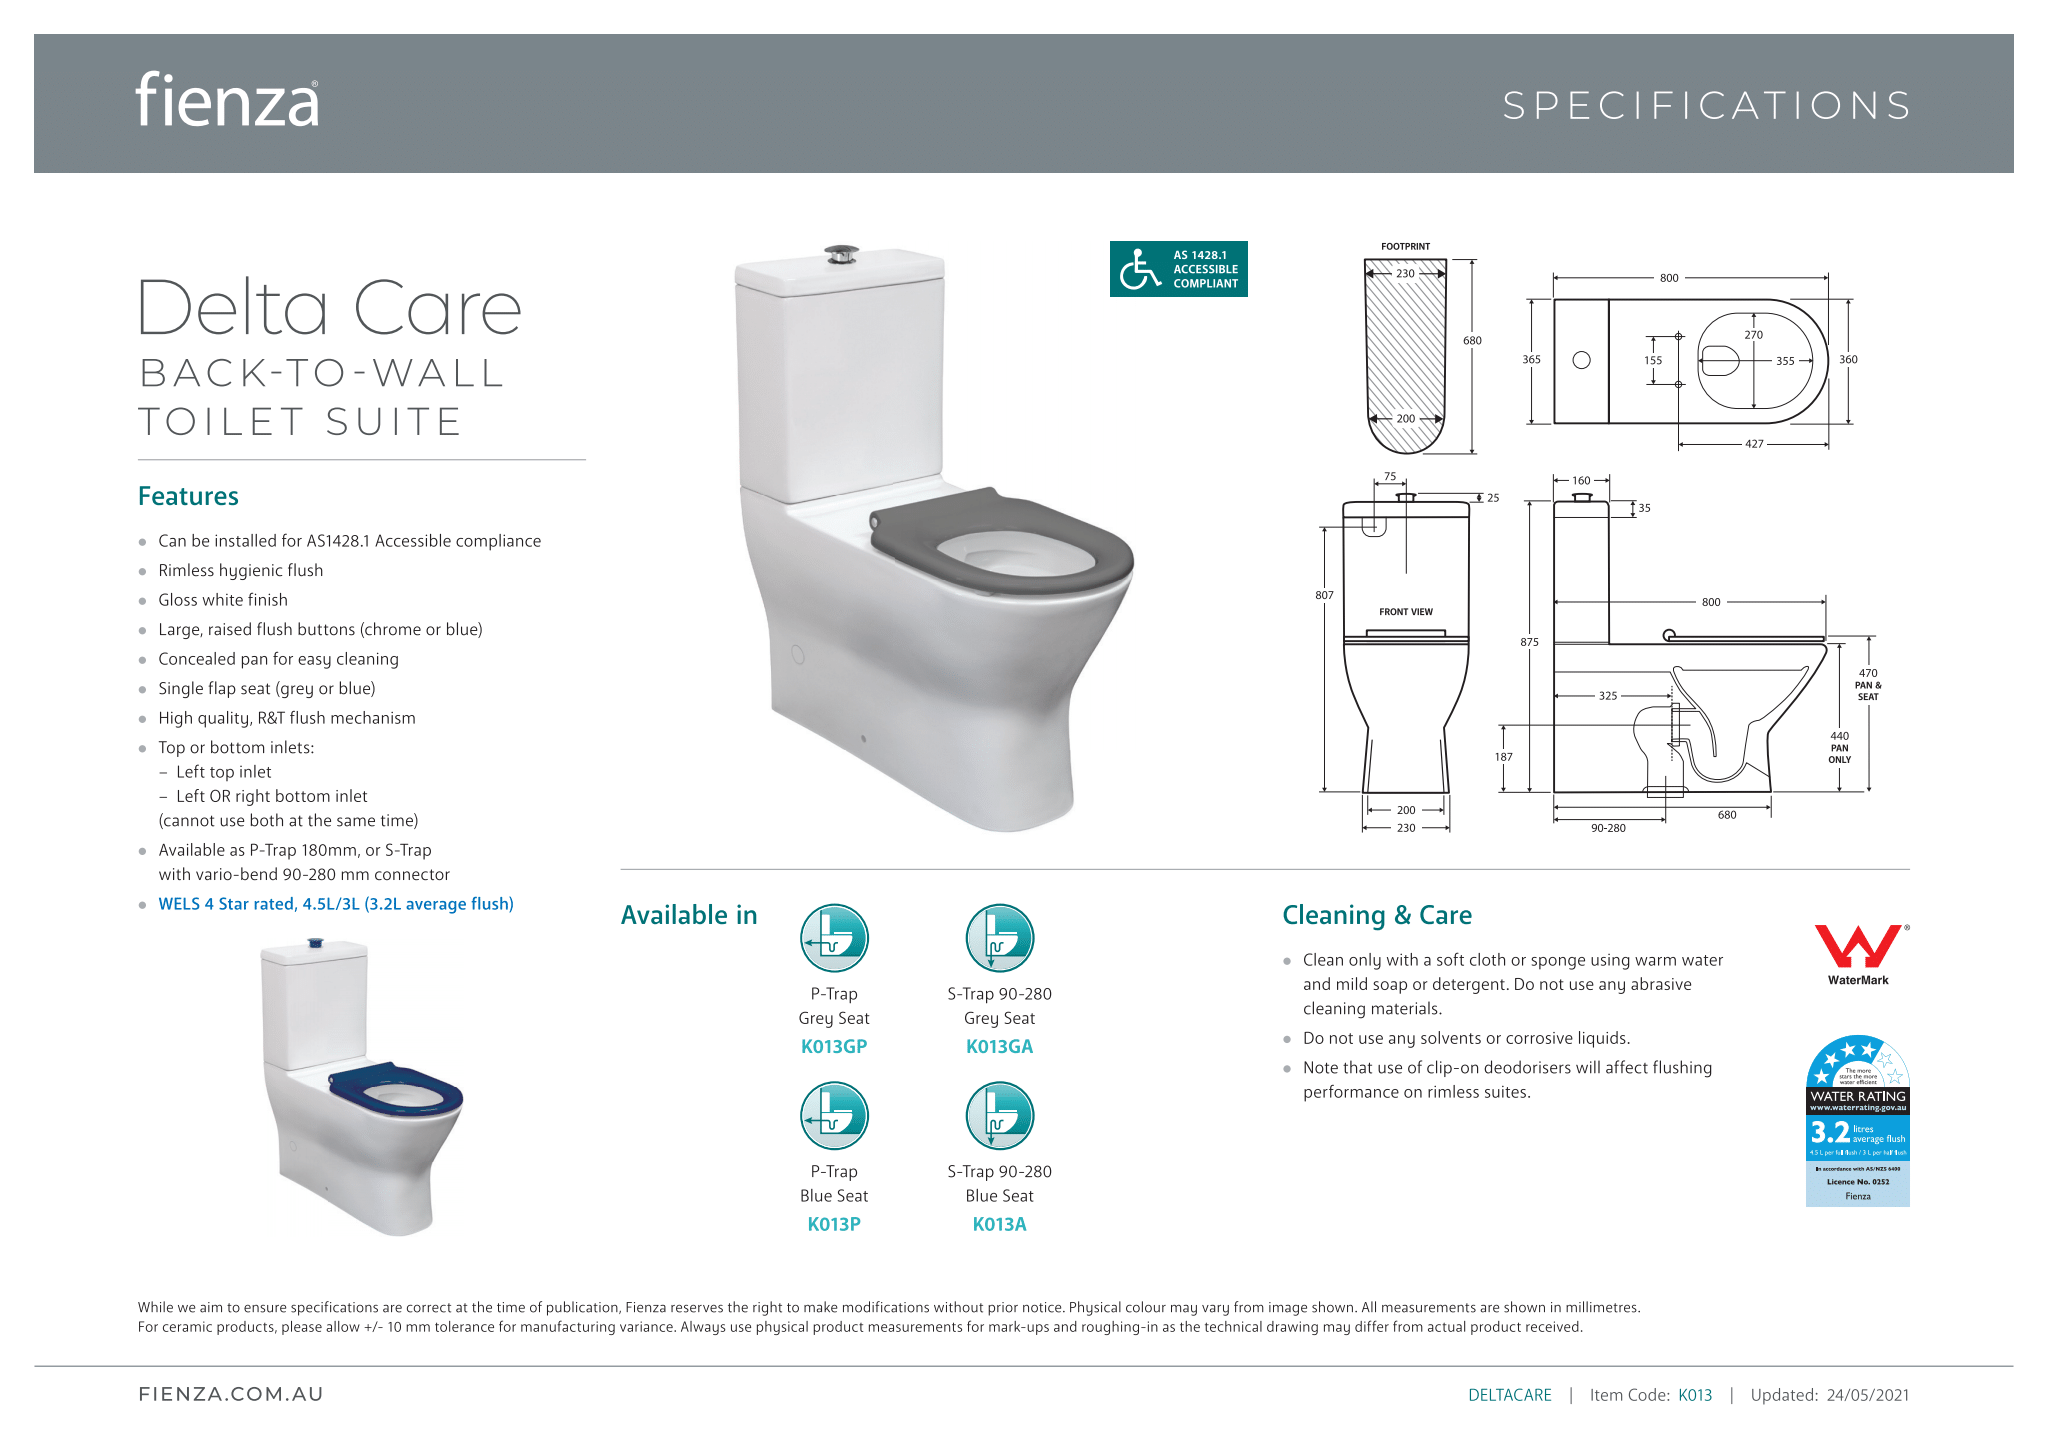 Fienza Delta Care Back-to-Wall Toilet Suite